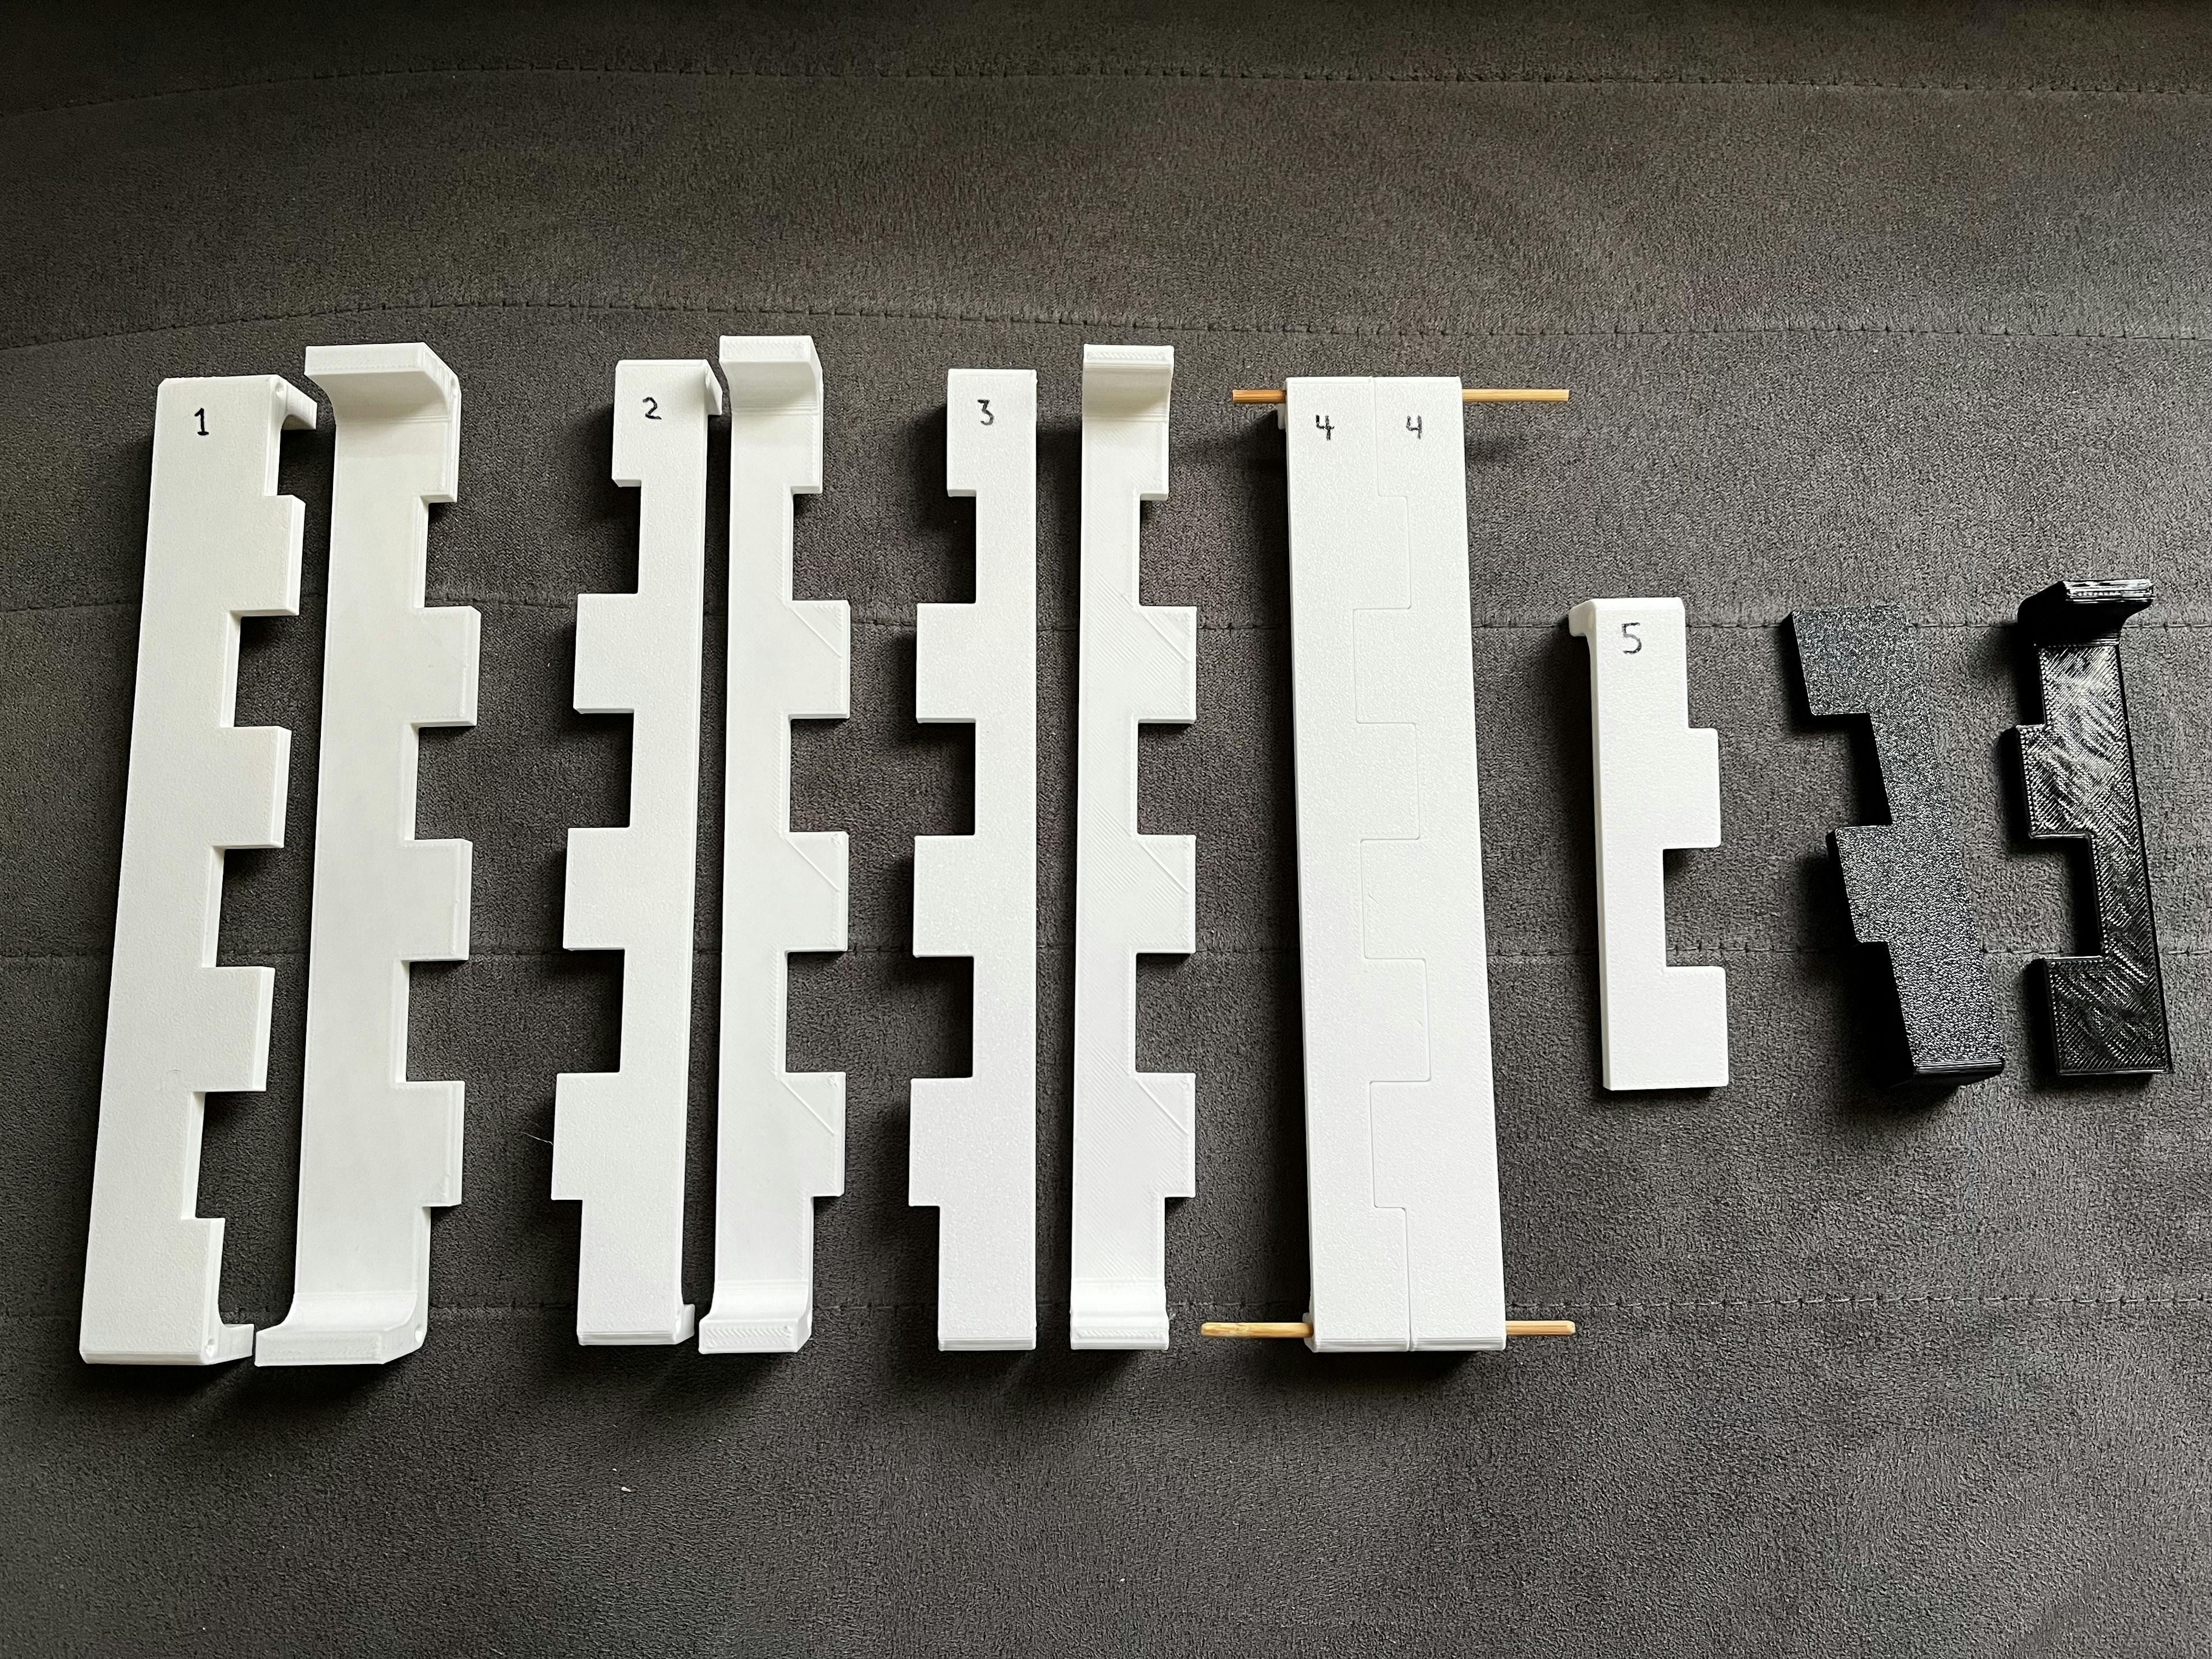 Several iterations of the 3D printed tray joint